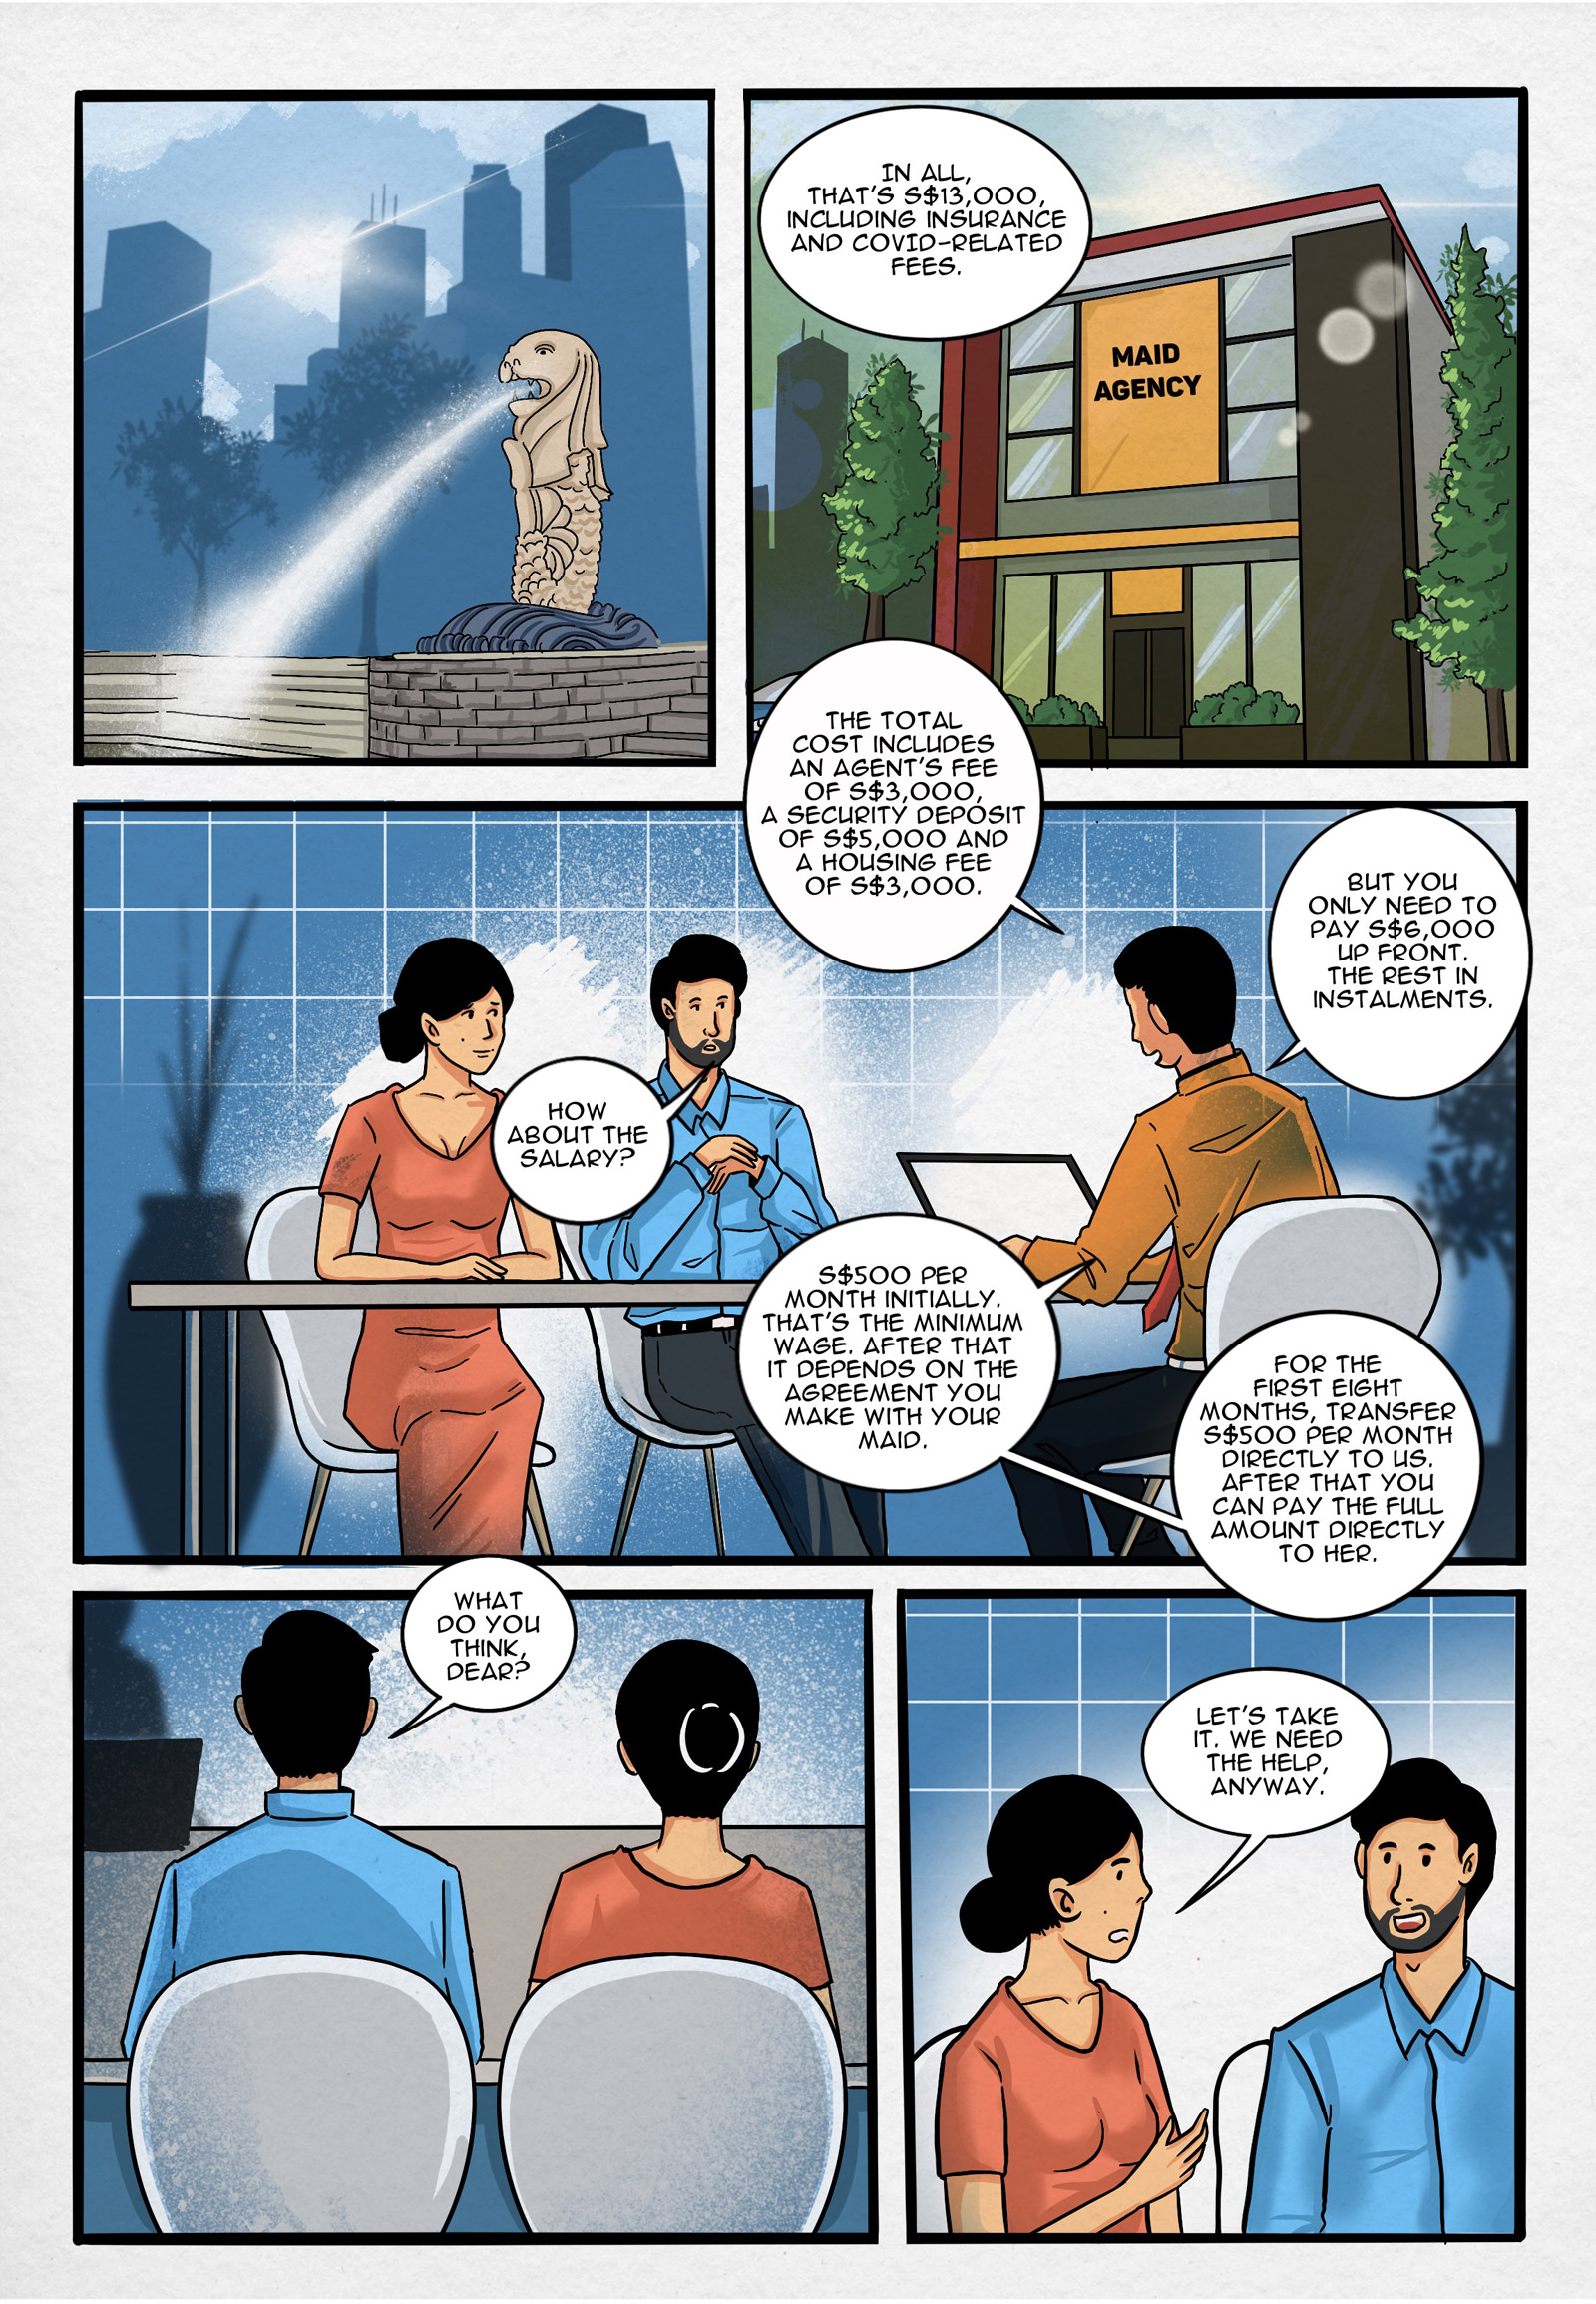 Page 6.
Panel 1. Moving to Singapore.

Panel 2. A pair of potential employers are talking to a Singaporean agent. Singaporean Agent: “In all, that’s S$13,000, including insurance and COVID-related fees.”

Panel 3. A detailed explanation of the cost to hire a domestic worker from Indonesia by the Singaporean agent. Singaporean Agent: “The total cost includes an agent’s fee of S$3,000, a security deposit of S$5,000 and a housing fee of S$3,000. But you only need to pay S$6,000 up front. The rest in instalments.” Male Employer: “How about the salary?” Singaporean Agent: “S$500 per month initially. That’s the minimum wage. After that it depends on the agreement you make with your maid. For the first eight months, transfer S$500 per month directly to us. After that you can pay the full amount directly to her.”

Panel 4. A discussion between the pair of employers. Male Employer: “What do you think, dear?”

Panel 5. Female Employer: “Let’s take it. We need the help, anyway.”
